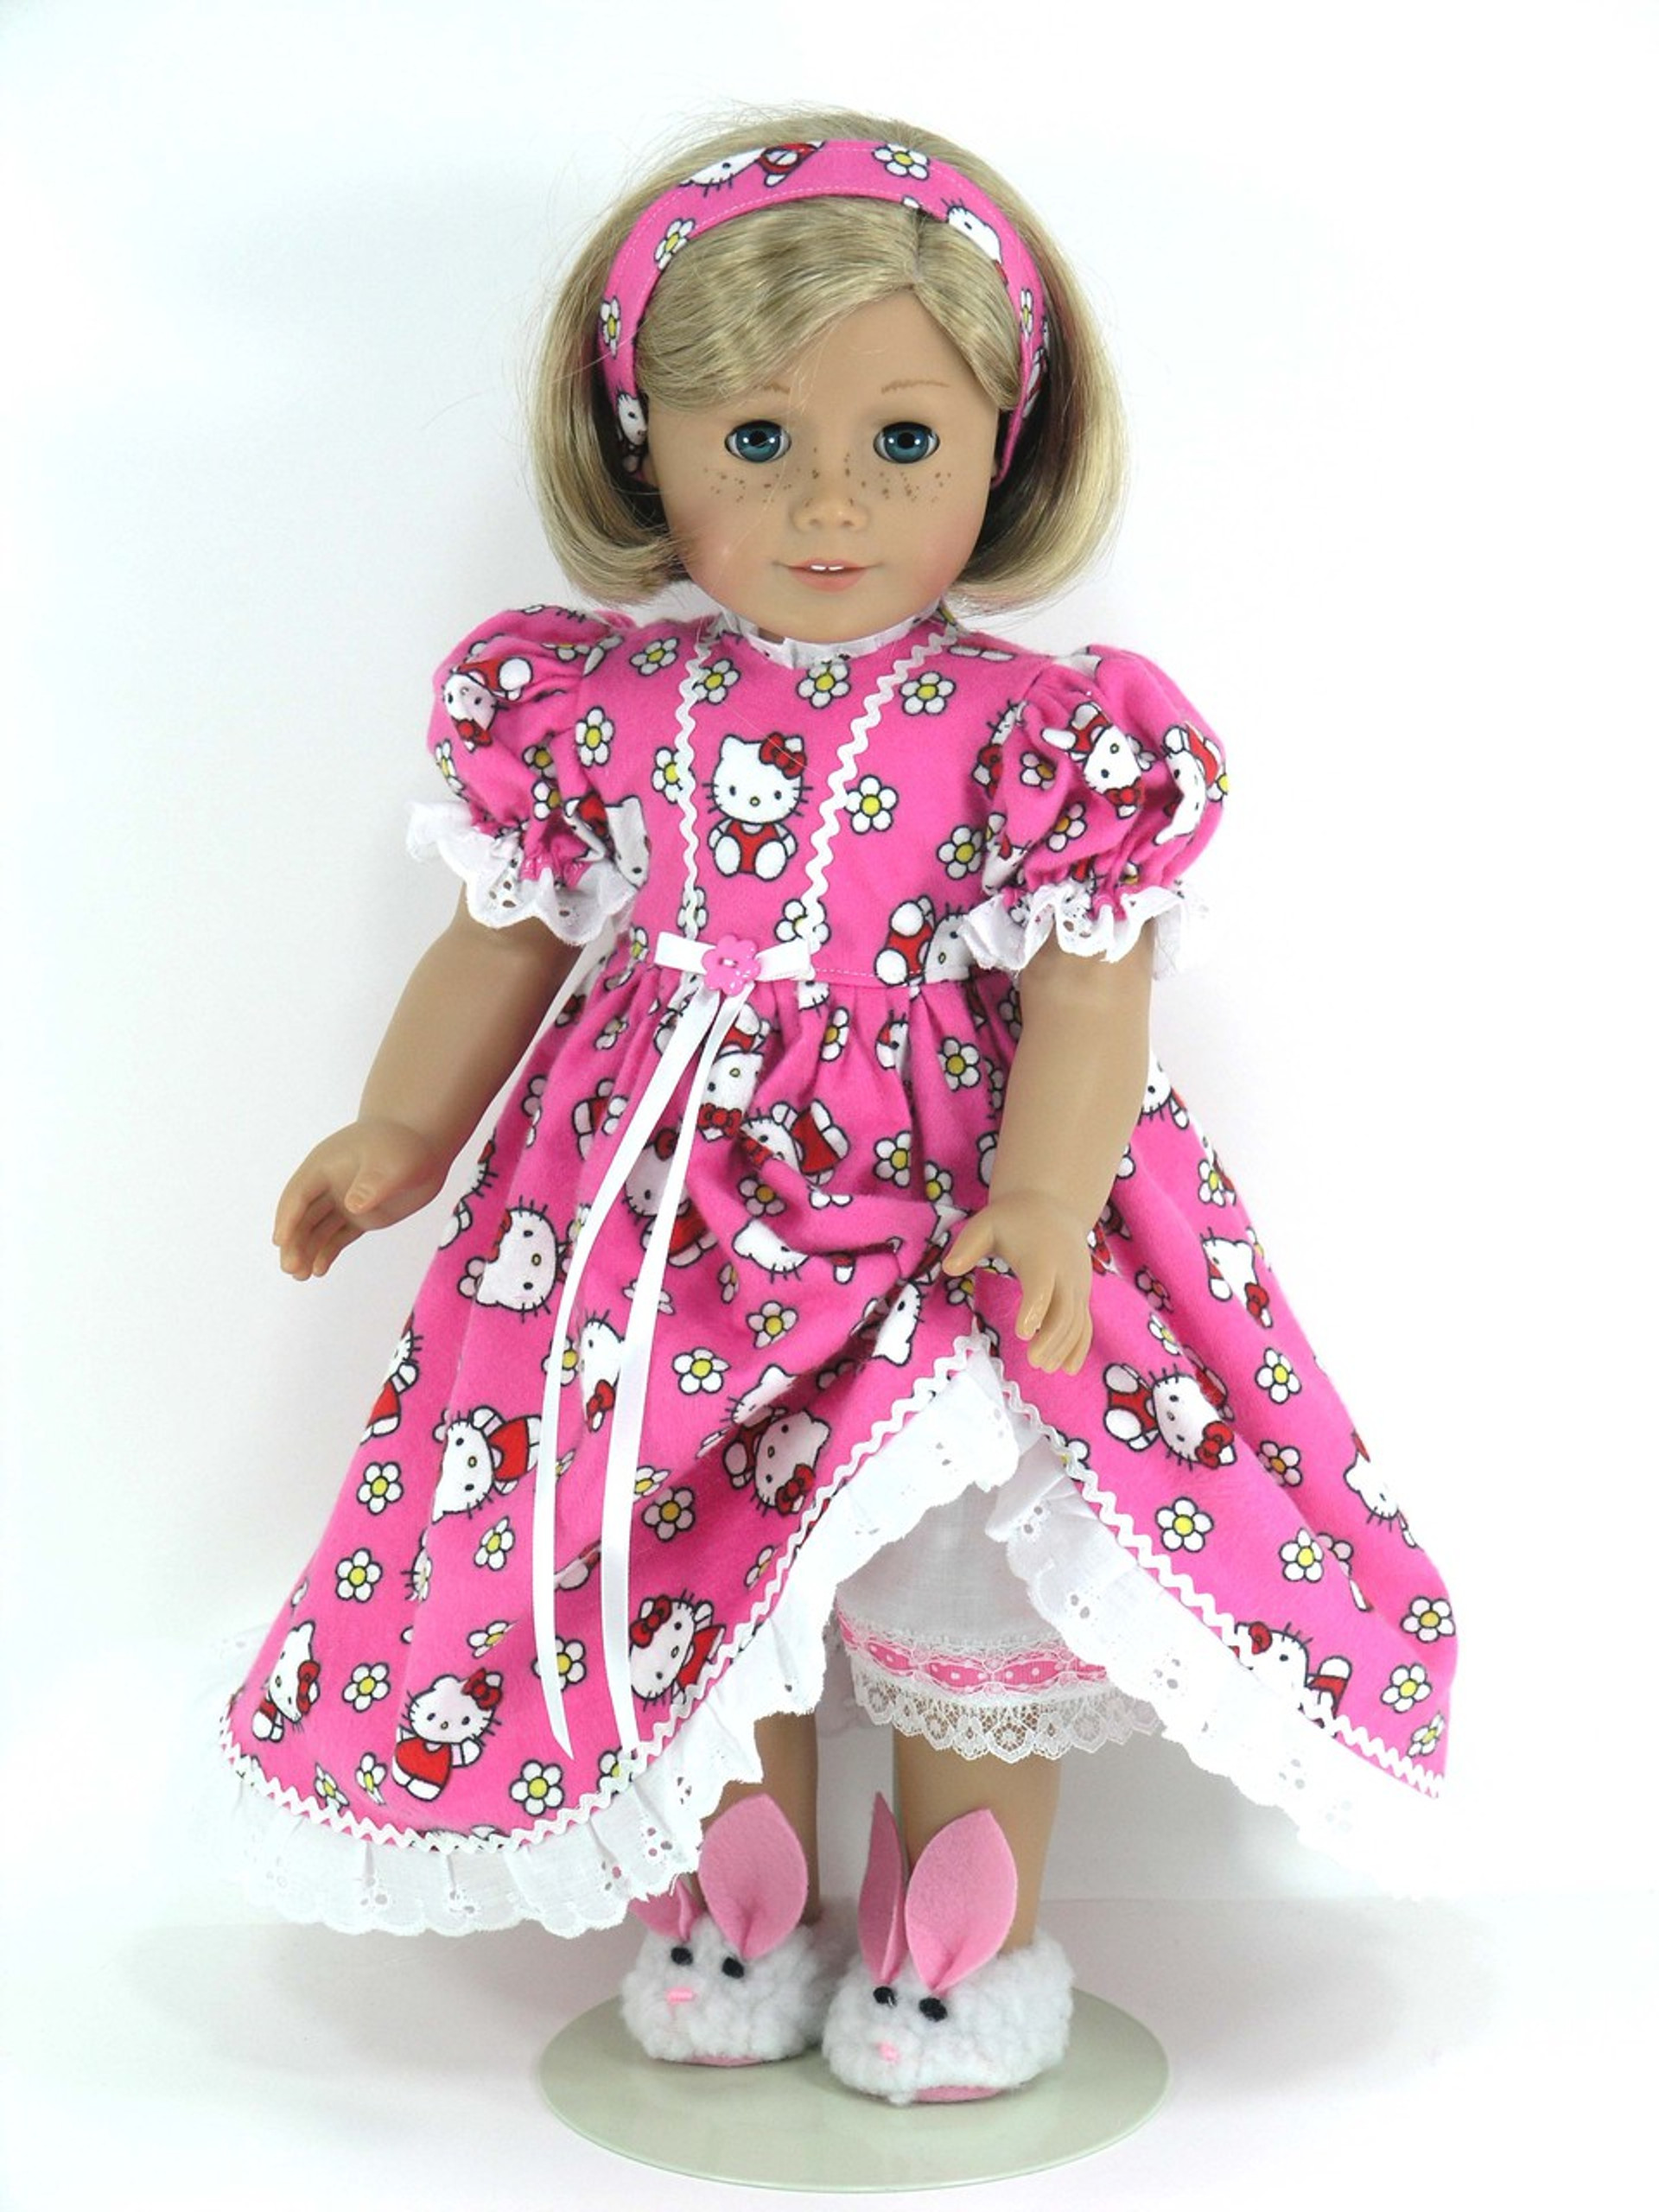 American Doll Sleepwear, Pajamas - Exclusively Linda Doll Clothes